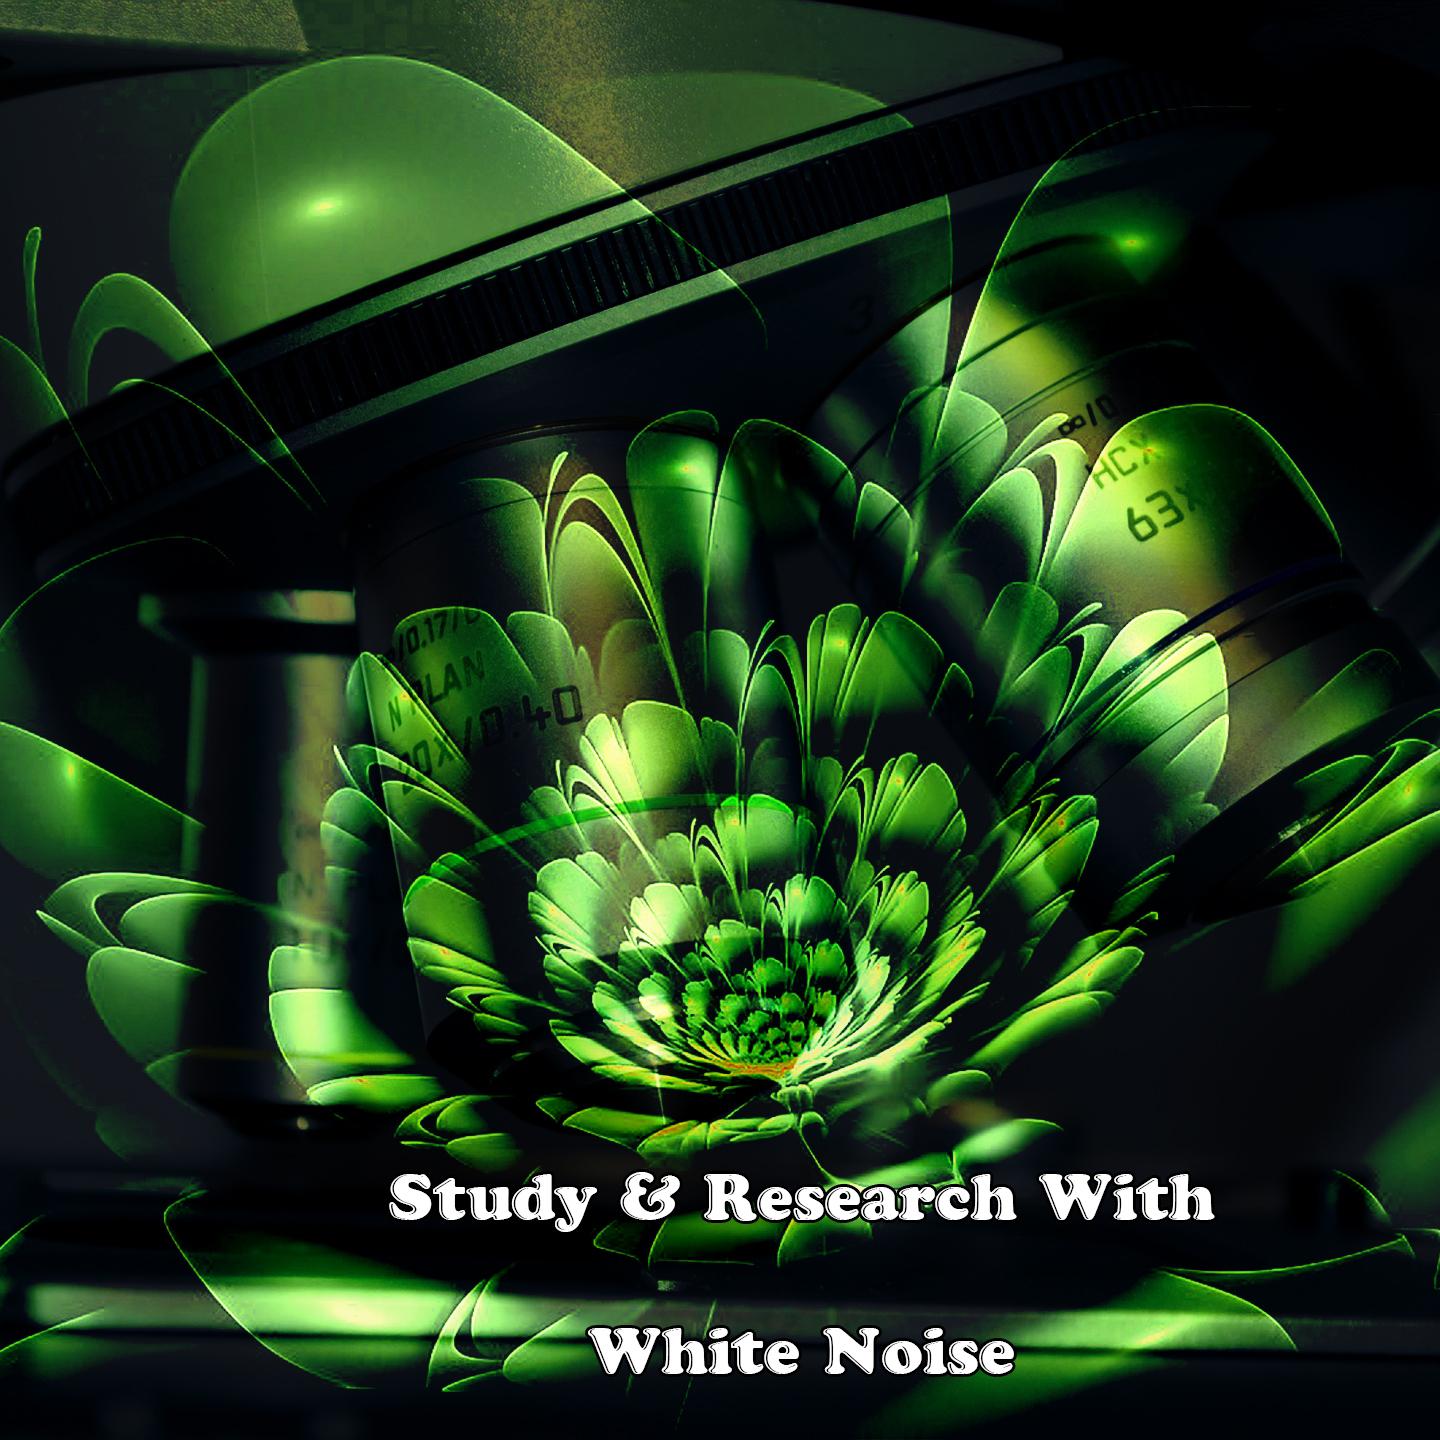 Study & Research With White Noise